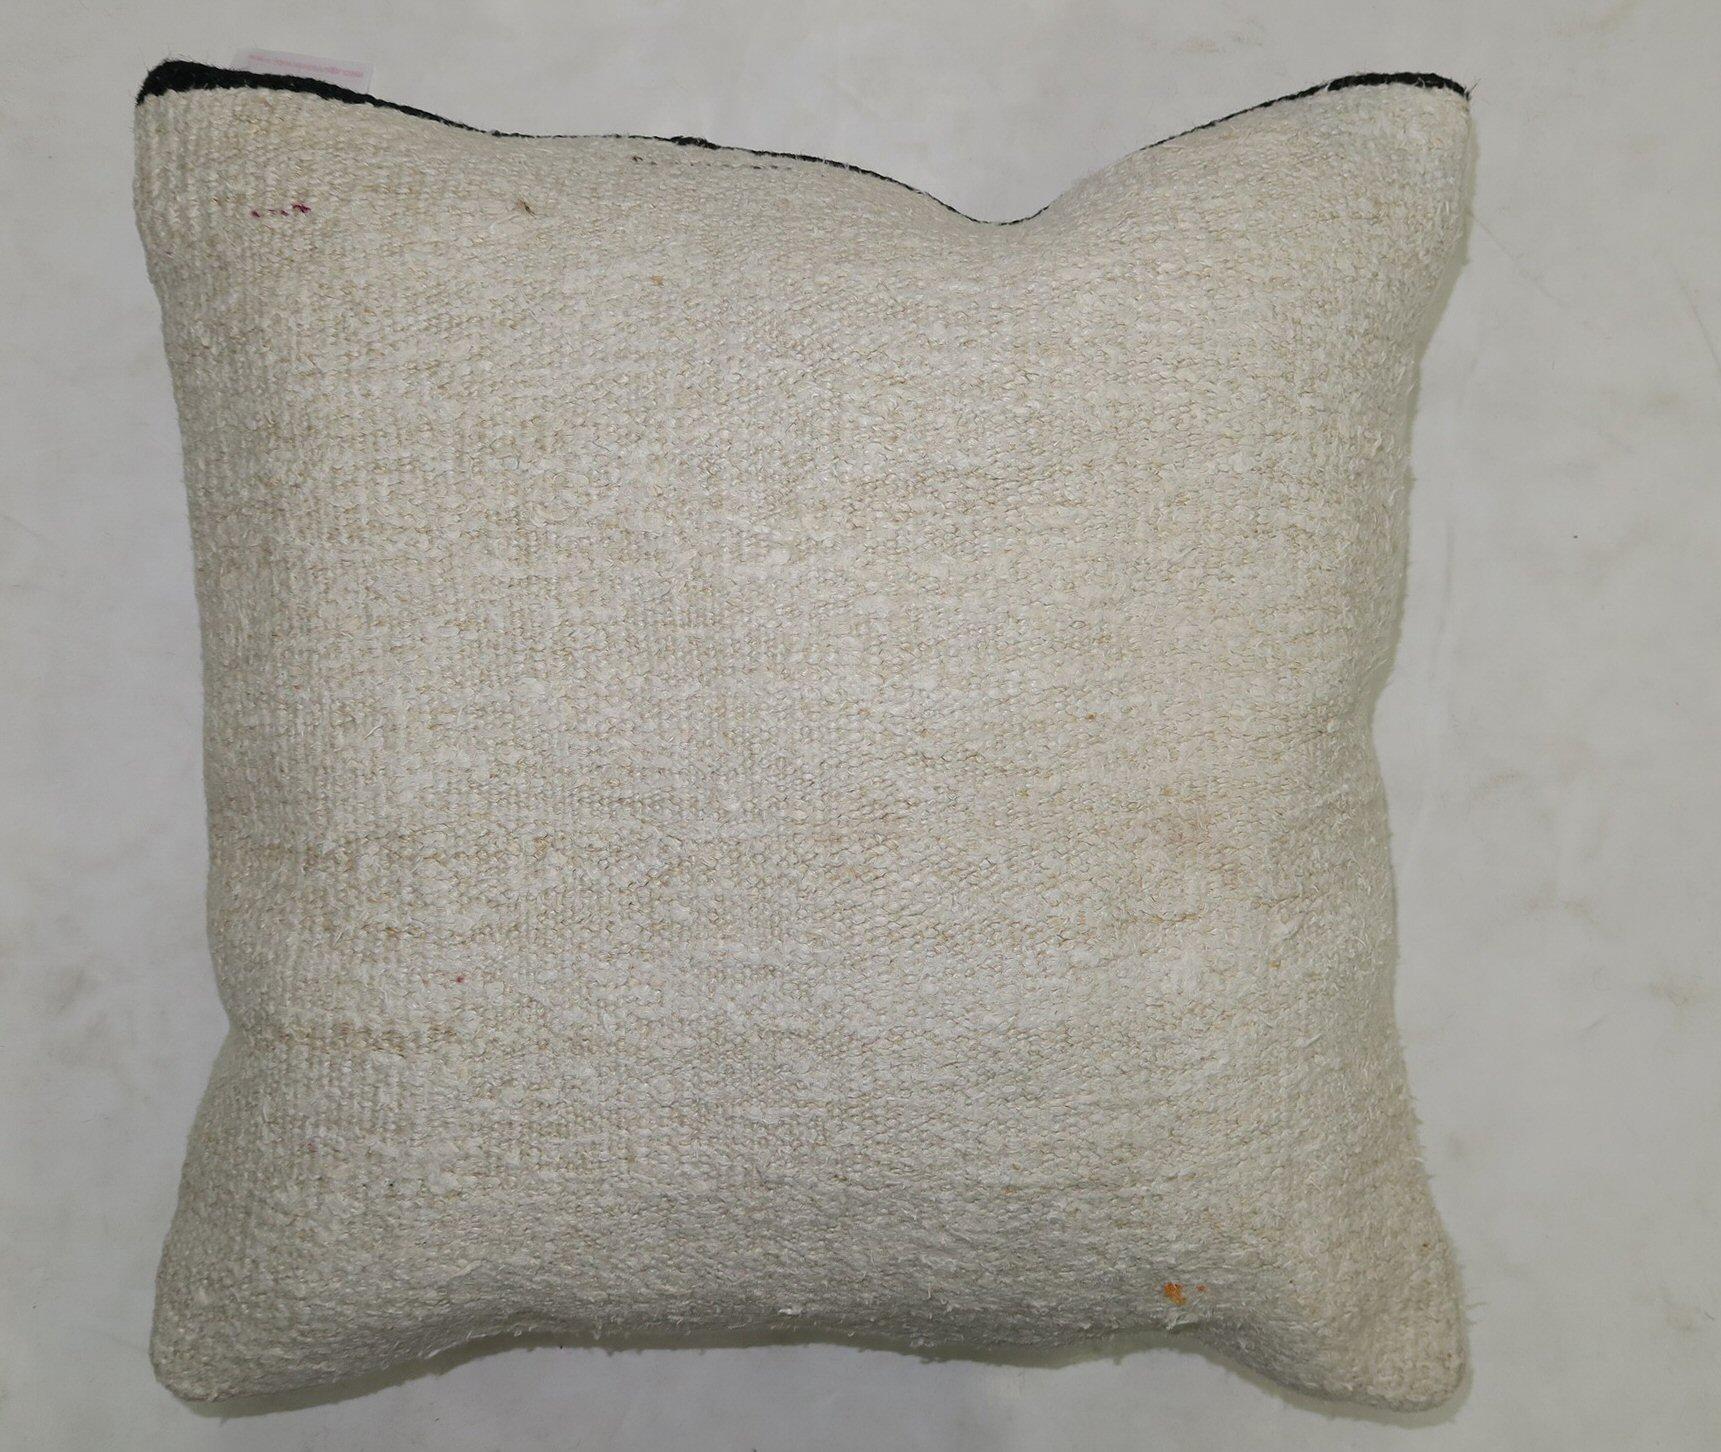 Pillow made from modern Turkish Kilim in white. 1 end has a black stripe.

Measures: 19